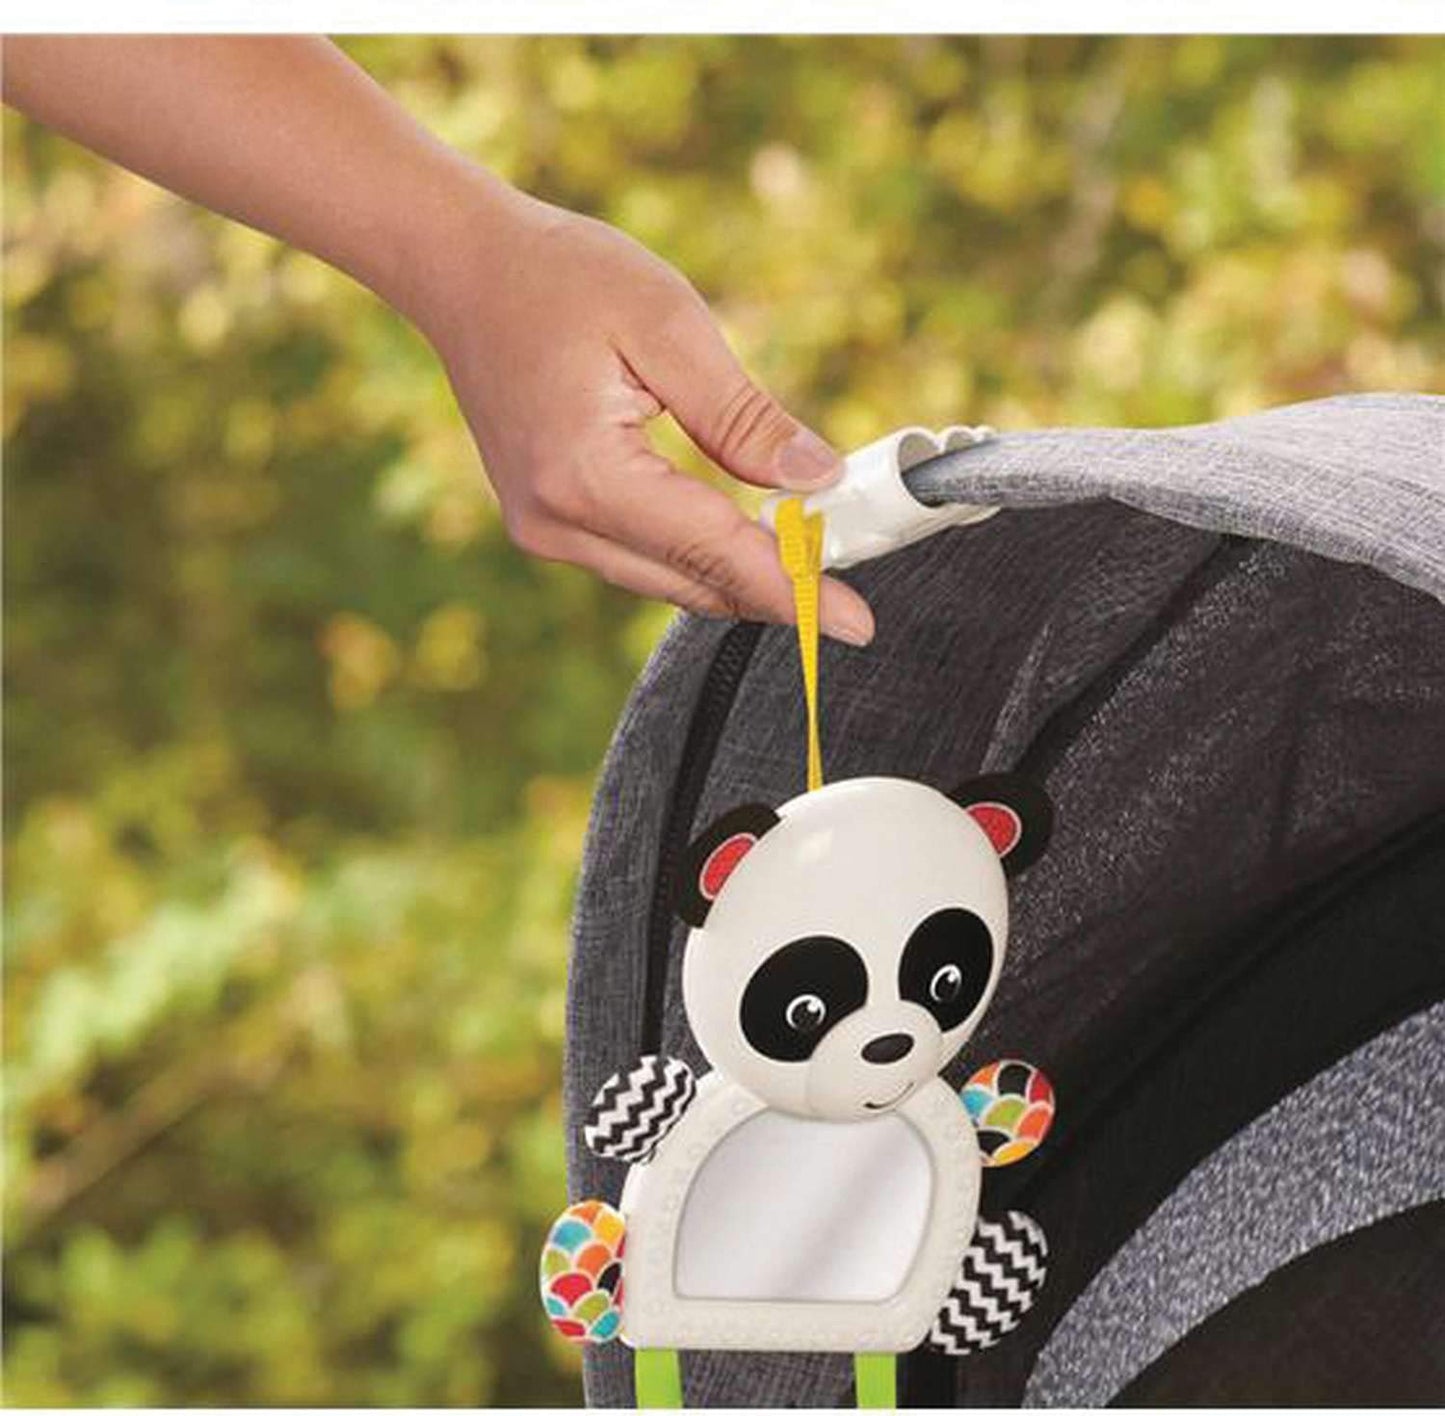 Fisher-Price On-The-Go Panda Mirror, Easily Attaches: Stroller, Diaper Bag